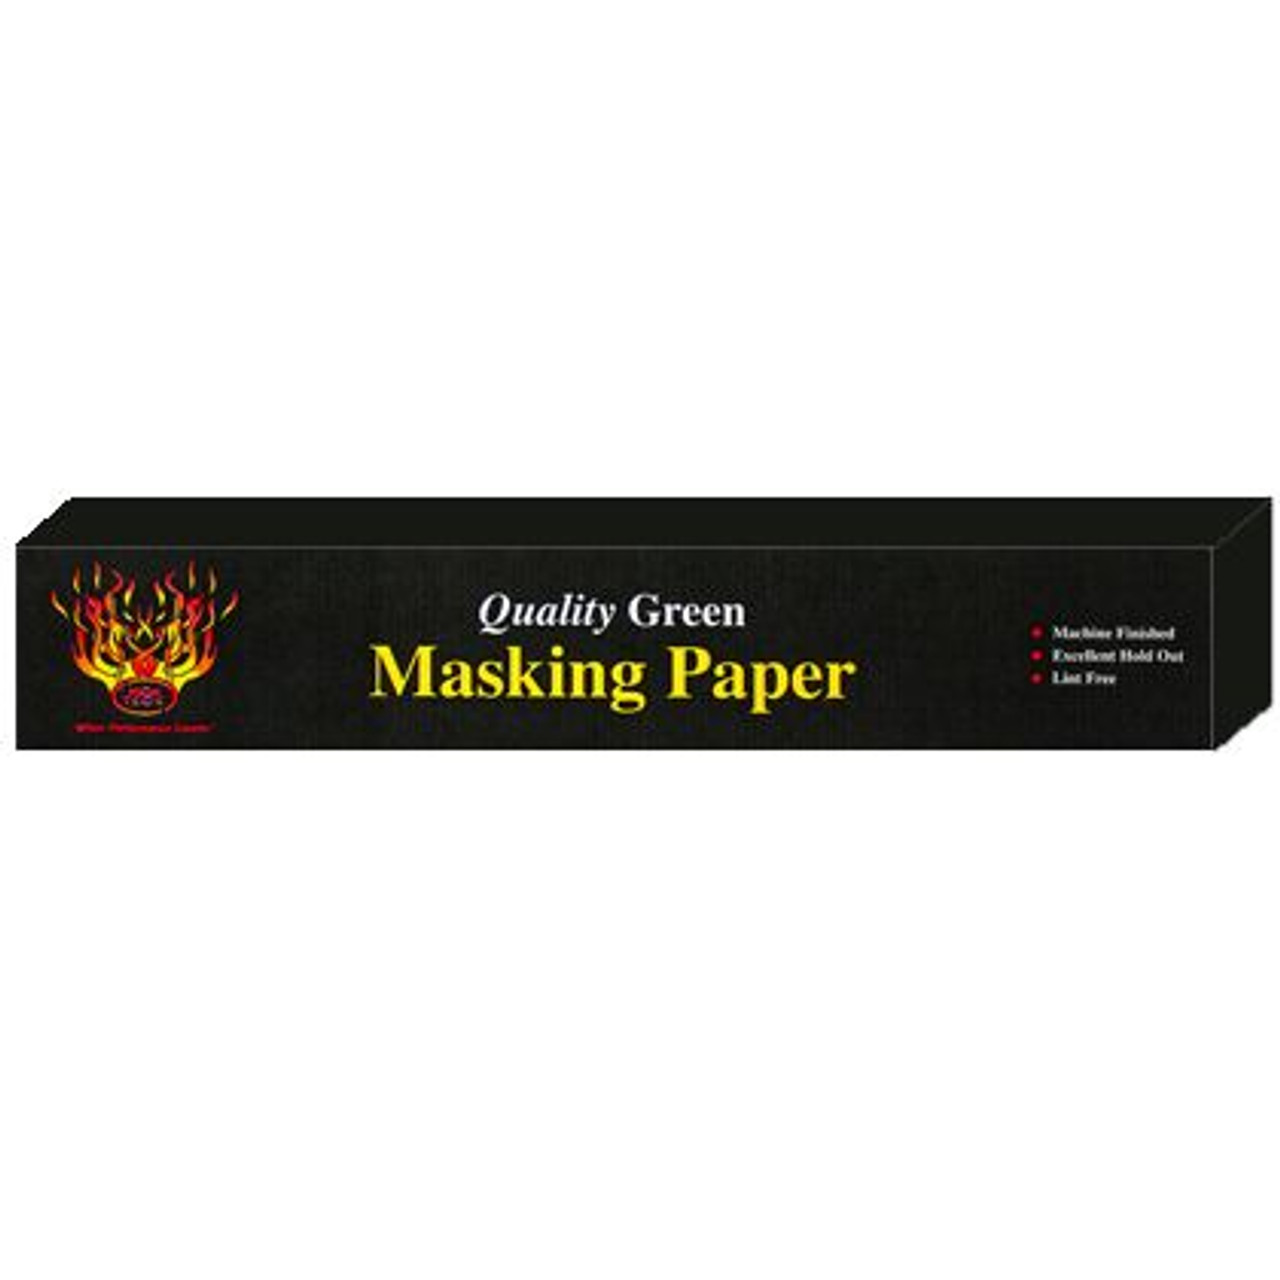 Quality Green Masking Paper, Weight: 28#, Size: 24" X 1000'